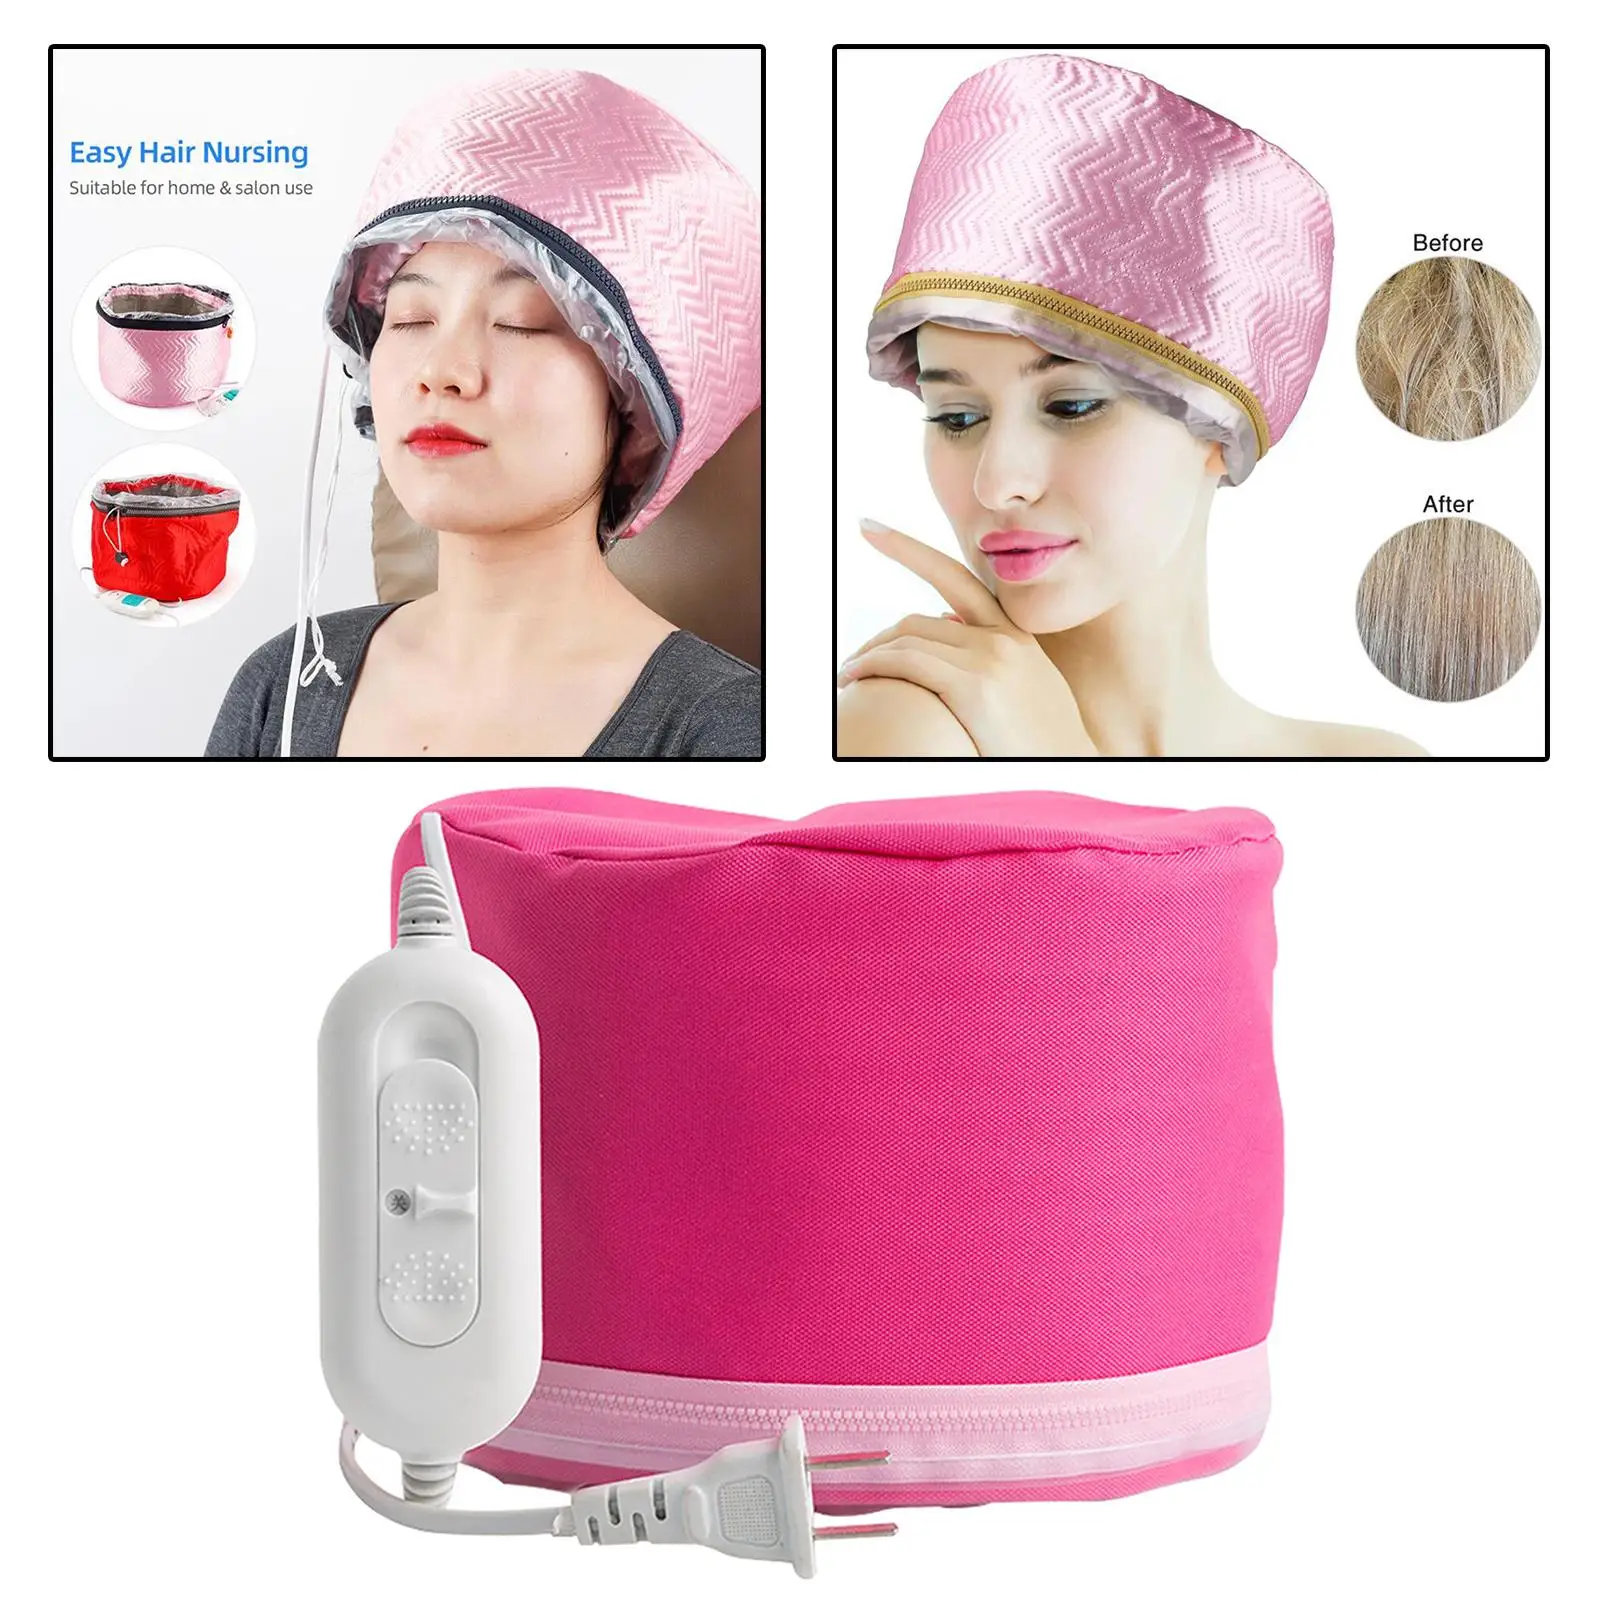 Hair Heating Caps Steamer 3-Mode Adjustable Thermal Caps Dryers for Deep Conditioning Salon Hair Scalp Hot Head Care Nursing